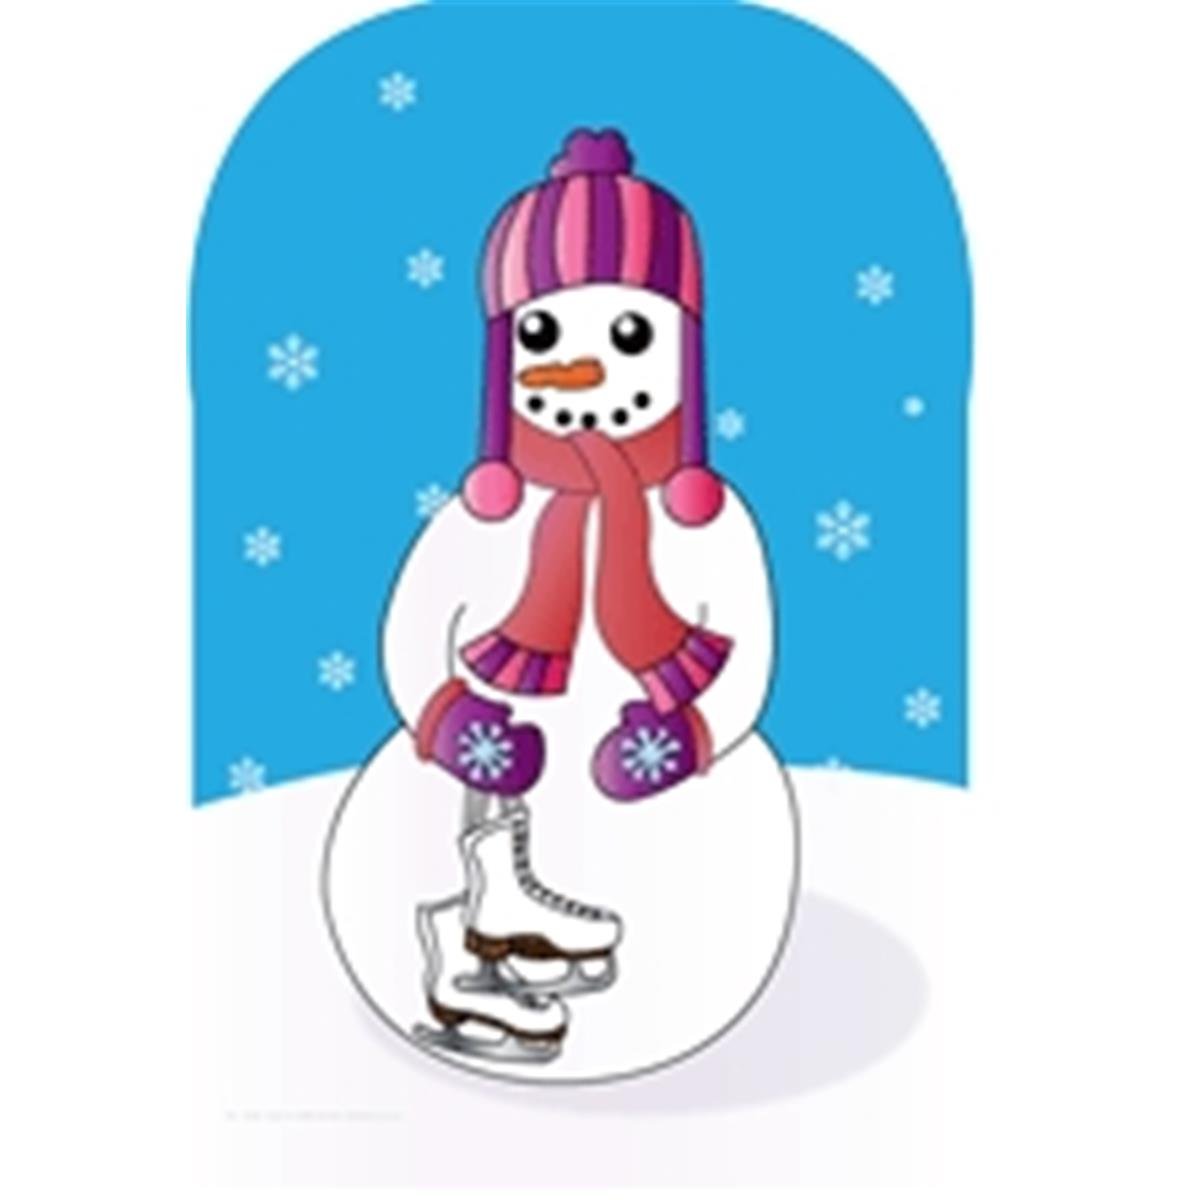 Se-1956 9 X 6 In. Large Notepad, Snowwoman - 50 Sheets Per Pack